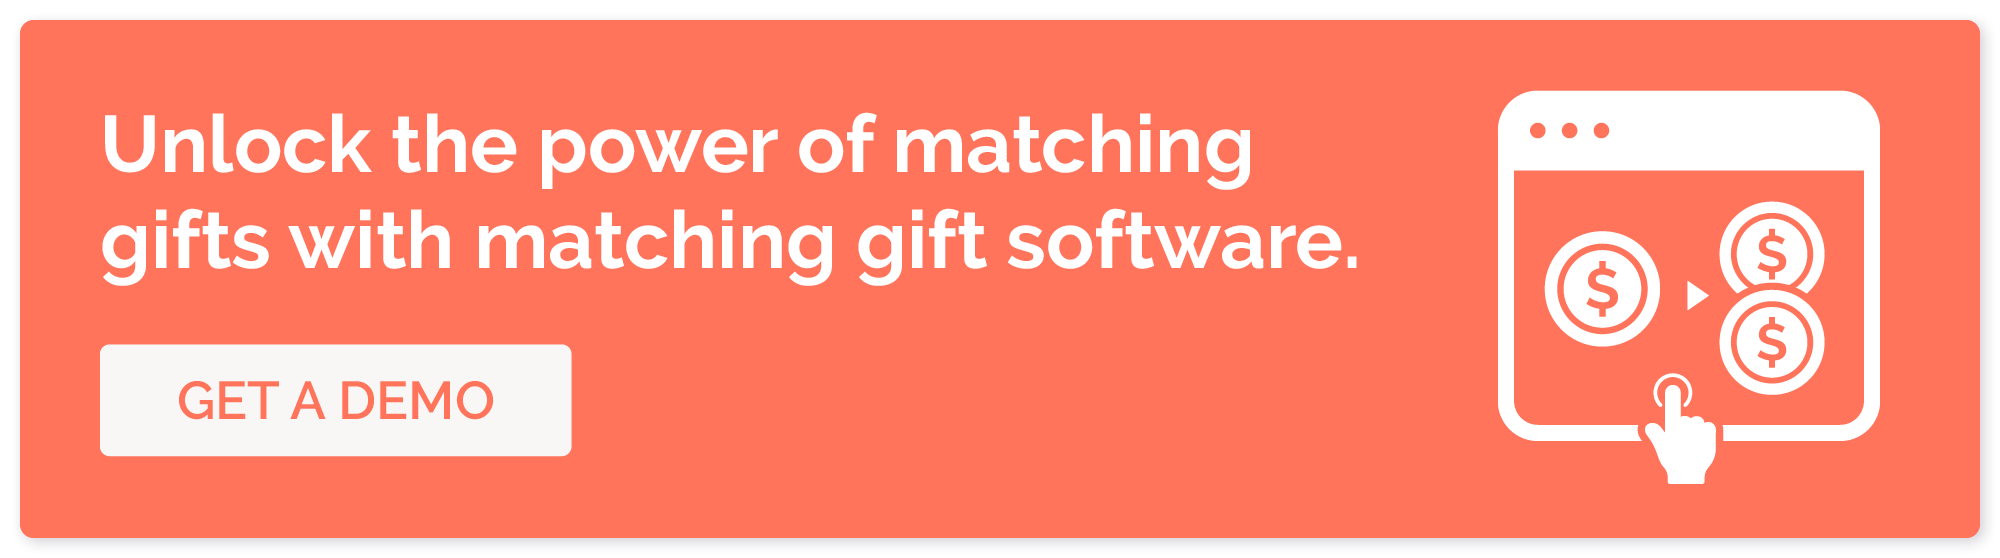 Get a demo of the best type of nonprofit software for increasing donation revenue: matching gift software.